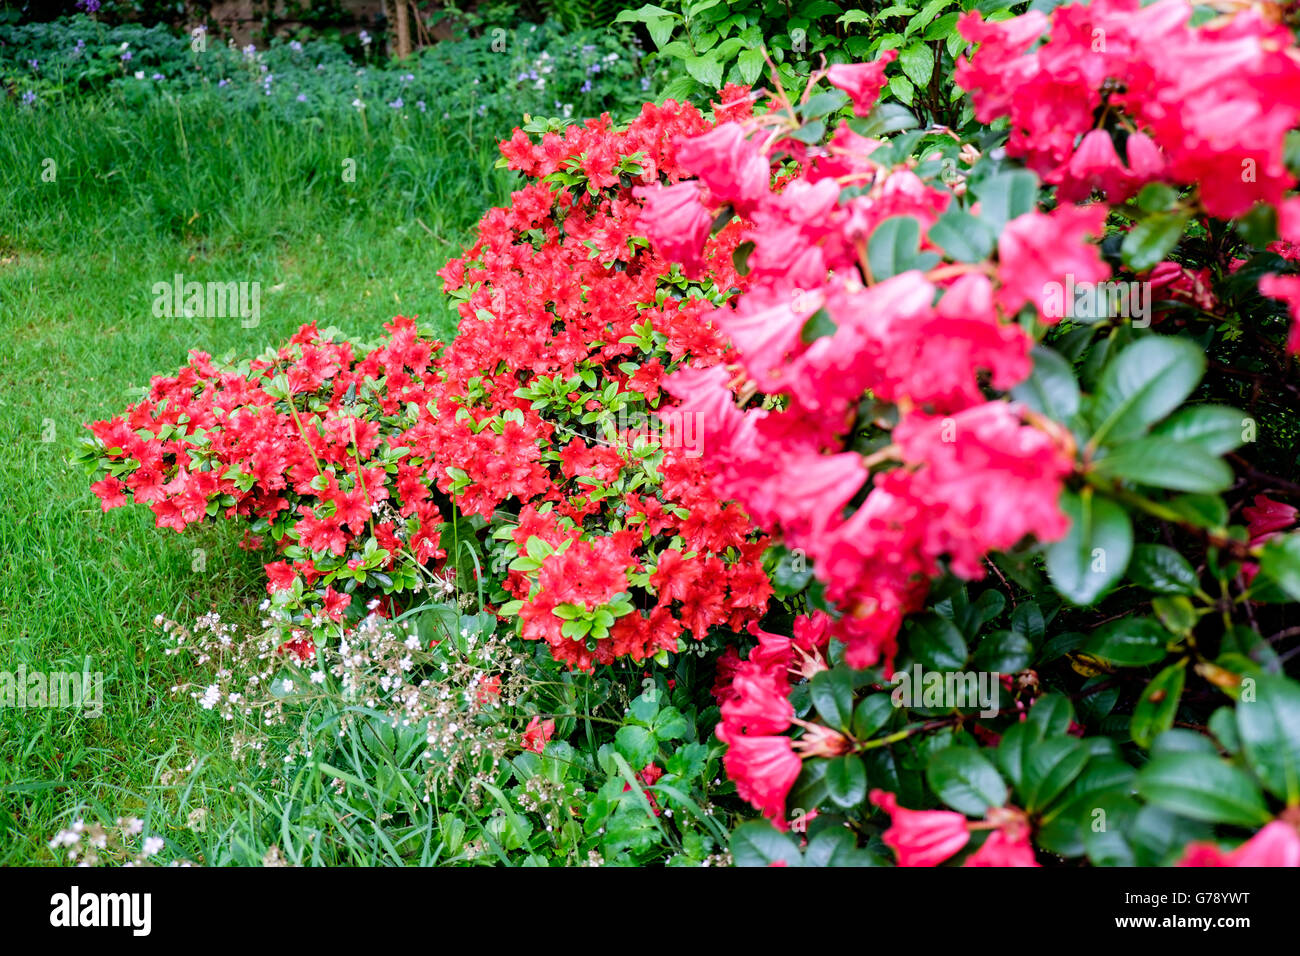 Red azalea and red rhododendron in flower in UK garden in spring Stock Photo